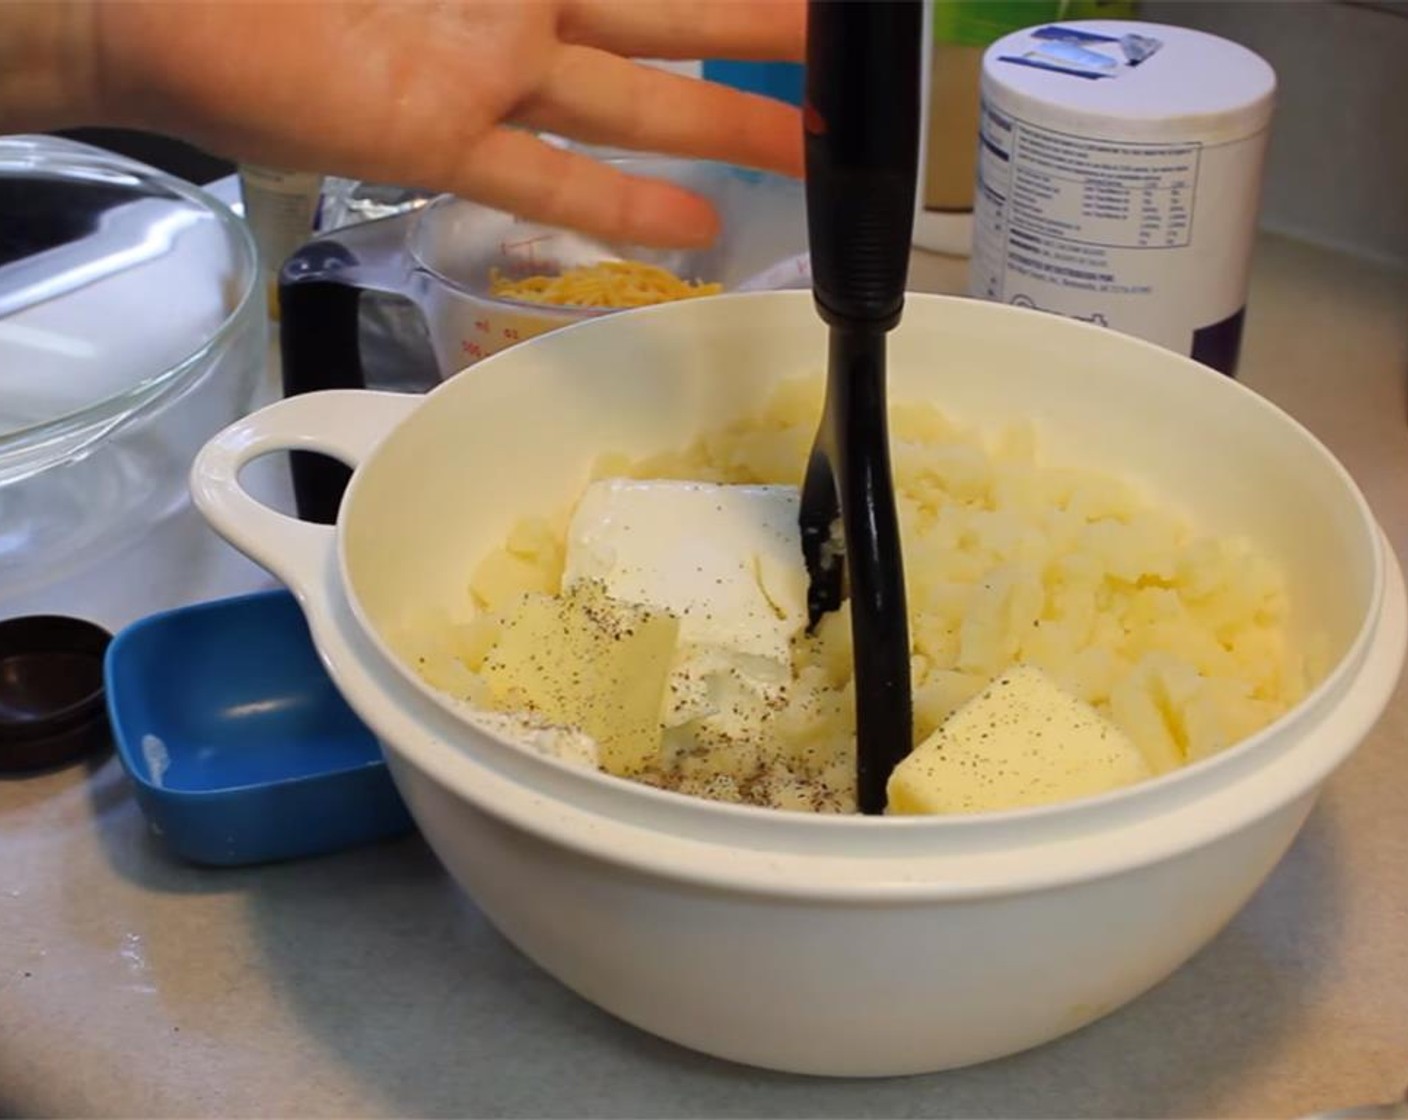 step 3 Transfer potatoes to a saucepan. Mash with a potato masher until almost smooth. Add Cream Cheese (1/2 cup), Sour Cream (1/2 cup), Butter (1/4 cup), Milk (1/4 cup), Salt (1 tsp) and Ground Black Pepper (1/2 tsp). Continue mashing until smooth.